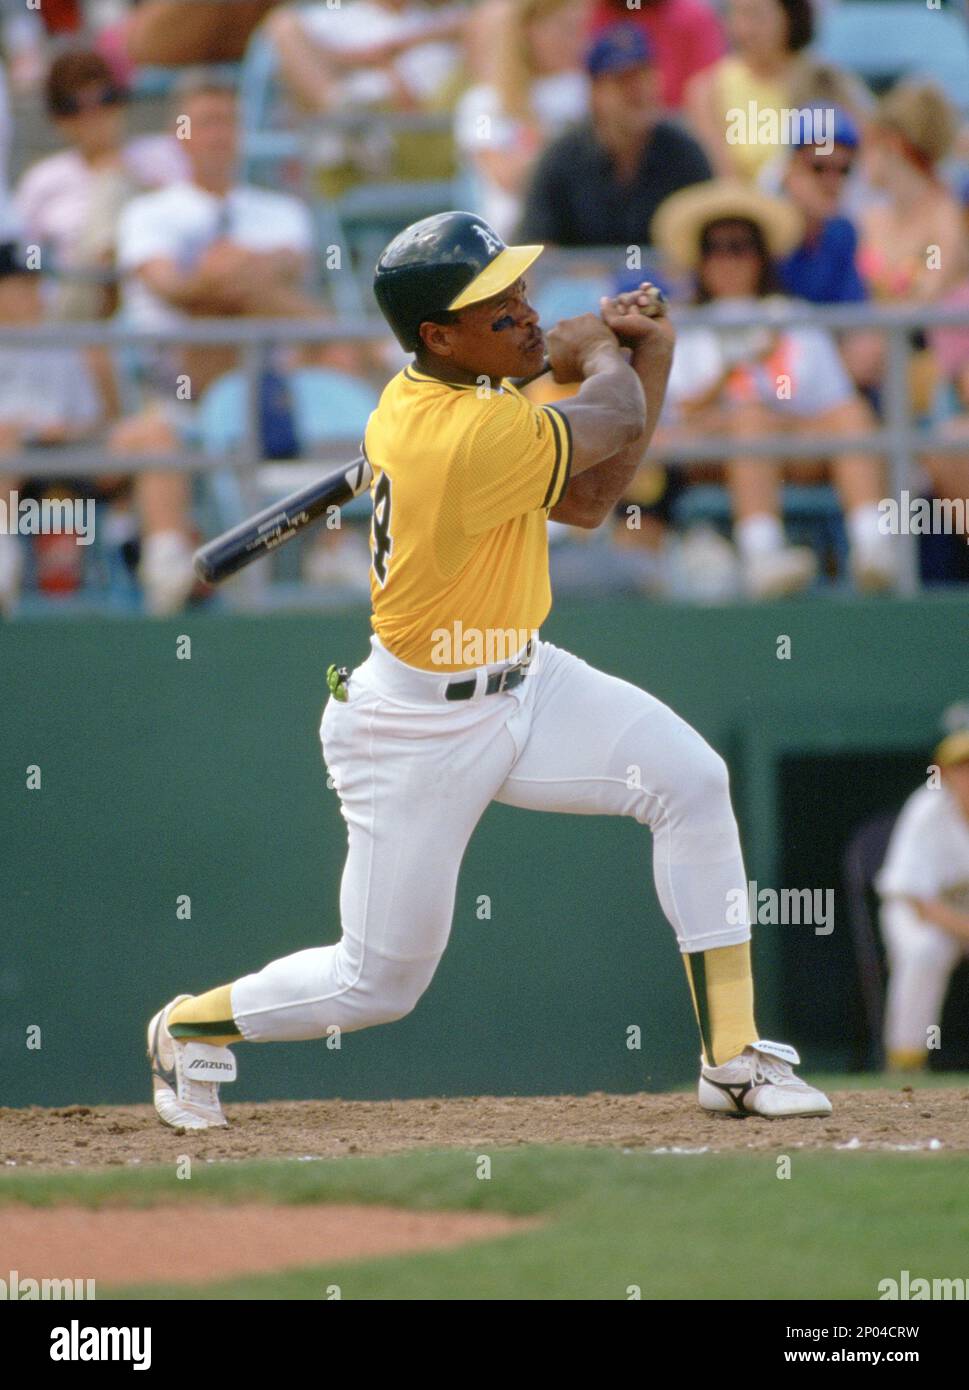 Oakland A's Rickey Henderson (24) during a game from his 1992 season with  the Oakland A's. Rickey Henderson played for 25 years with 9 different teams,  was a 10-time All-Star was inducted